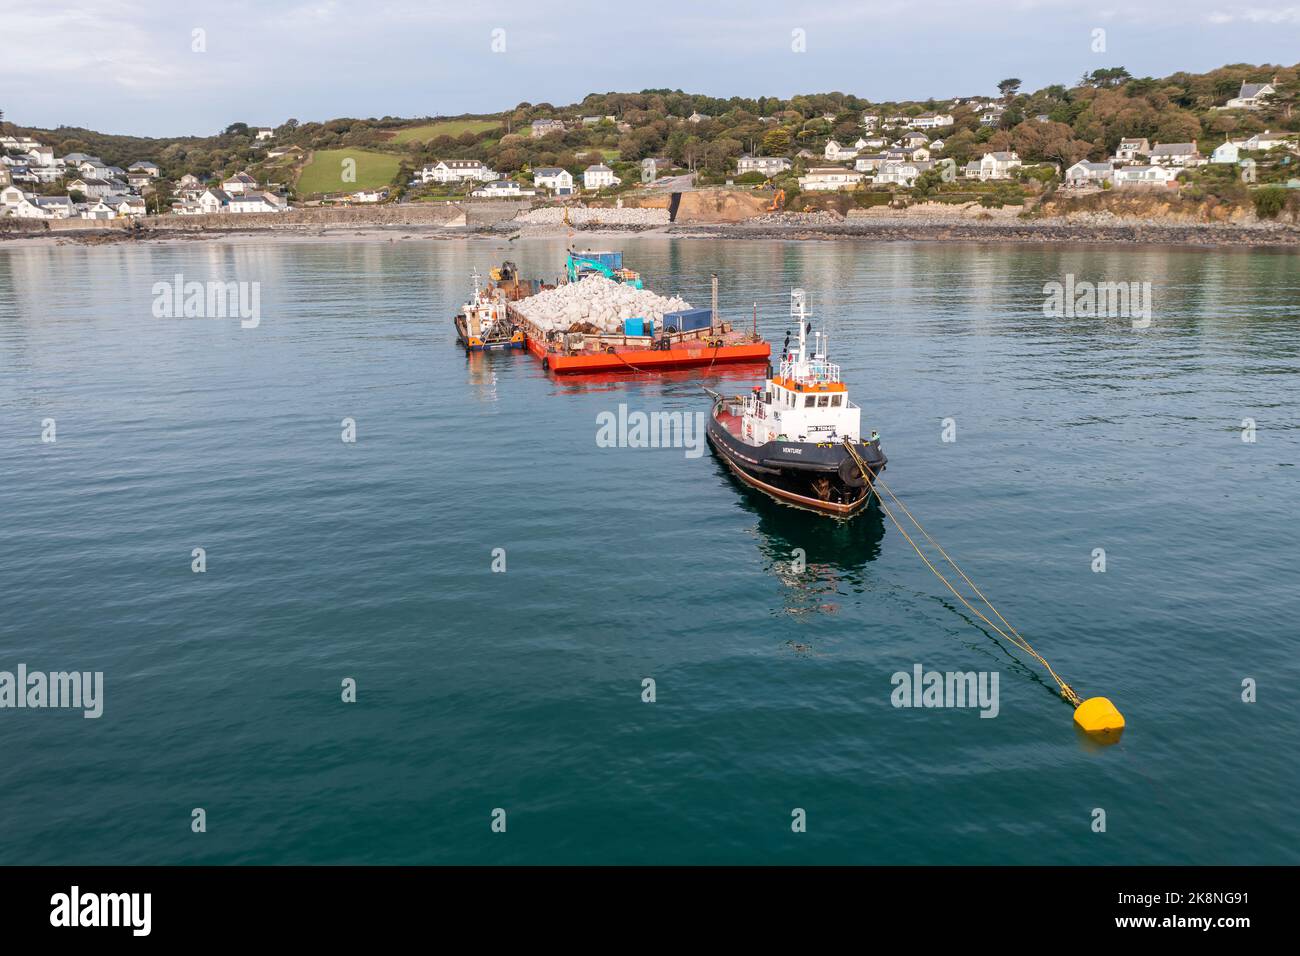 COVERACK, UK - SEPTEMBER 20, 2022.  A nautical tugboat and barge delivering quarried stone to enable the repair of the sea defences in Coverack, Cornw Stock Photo